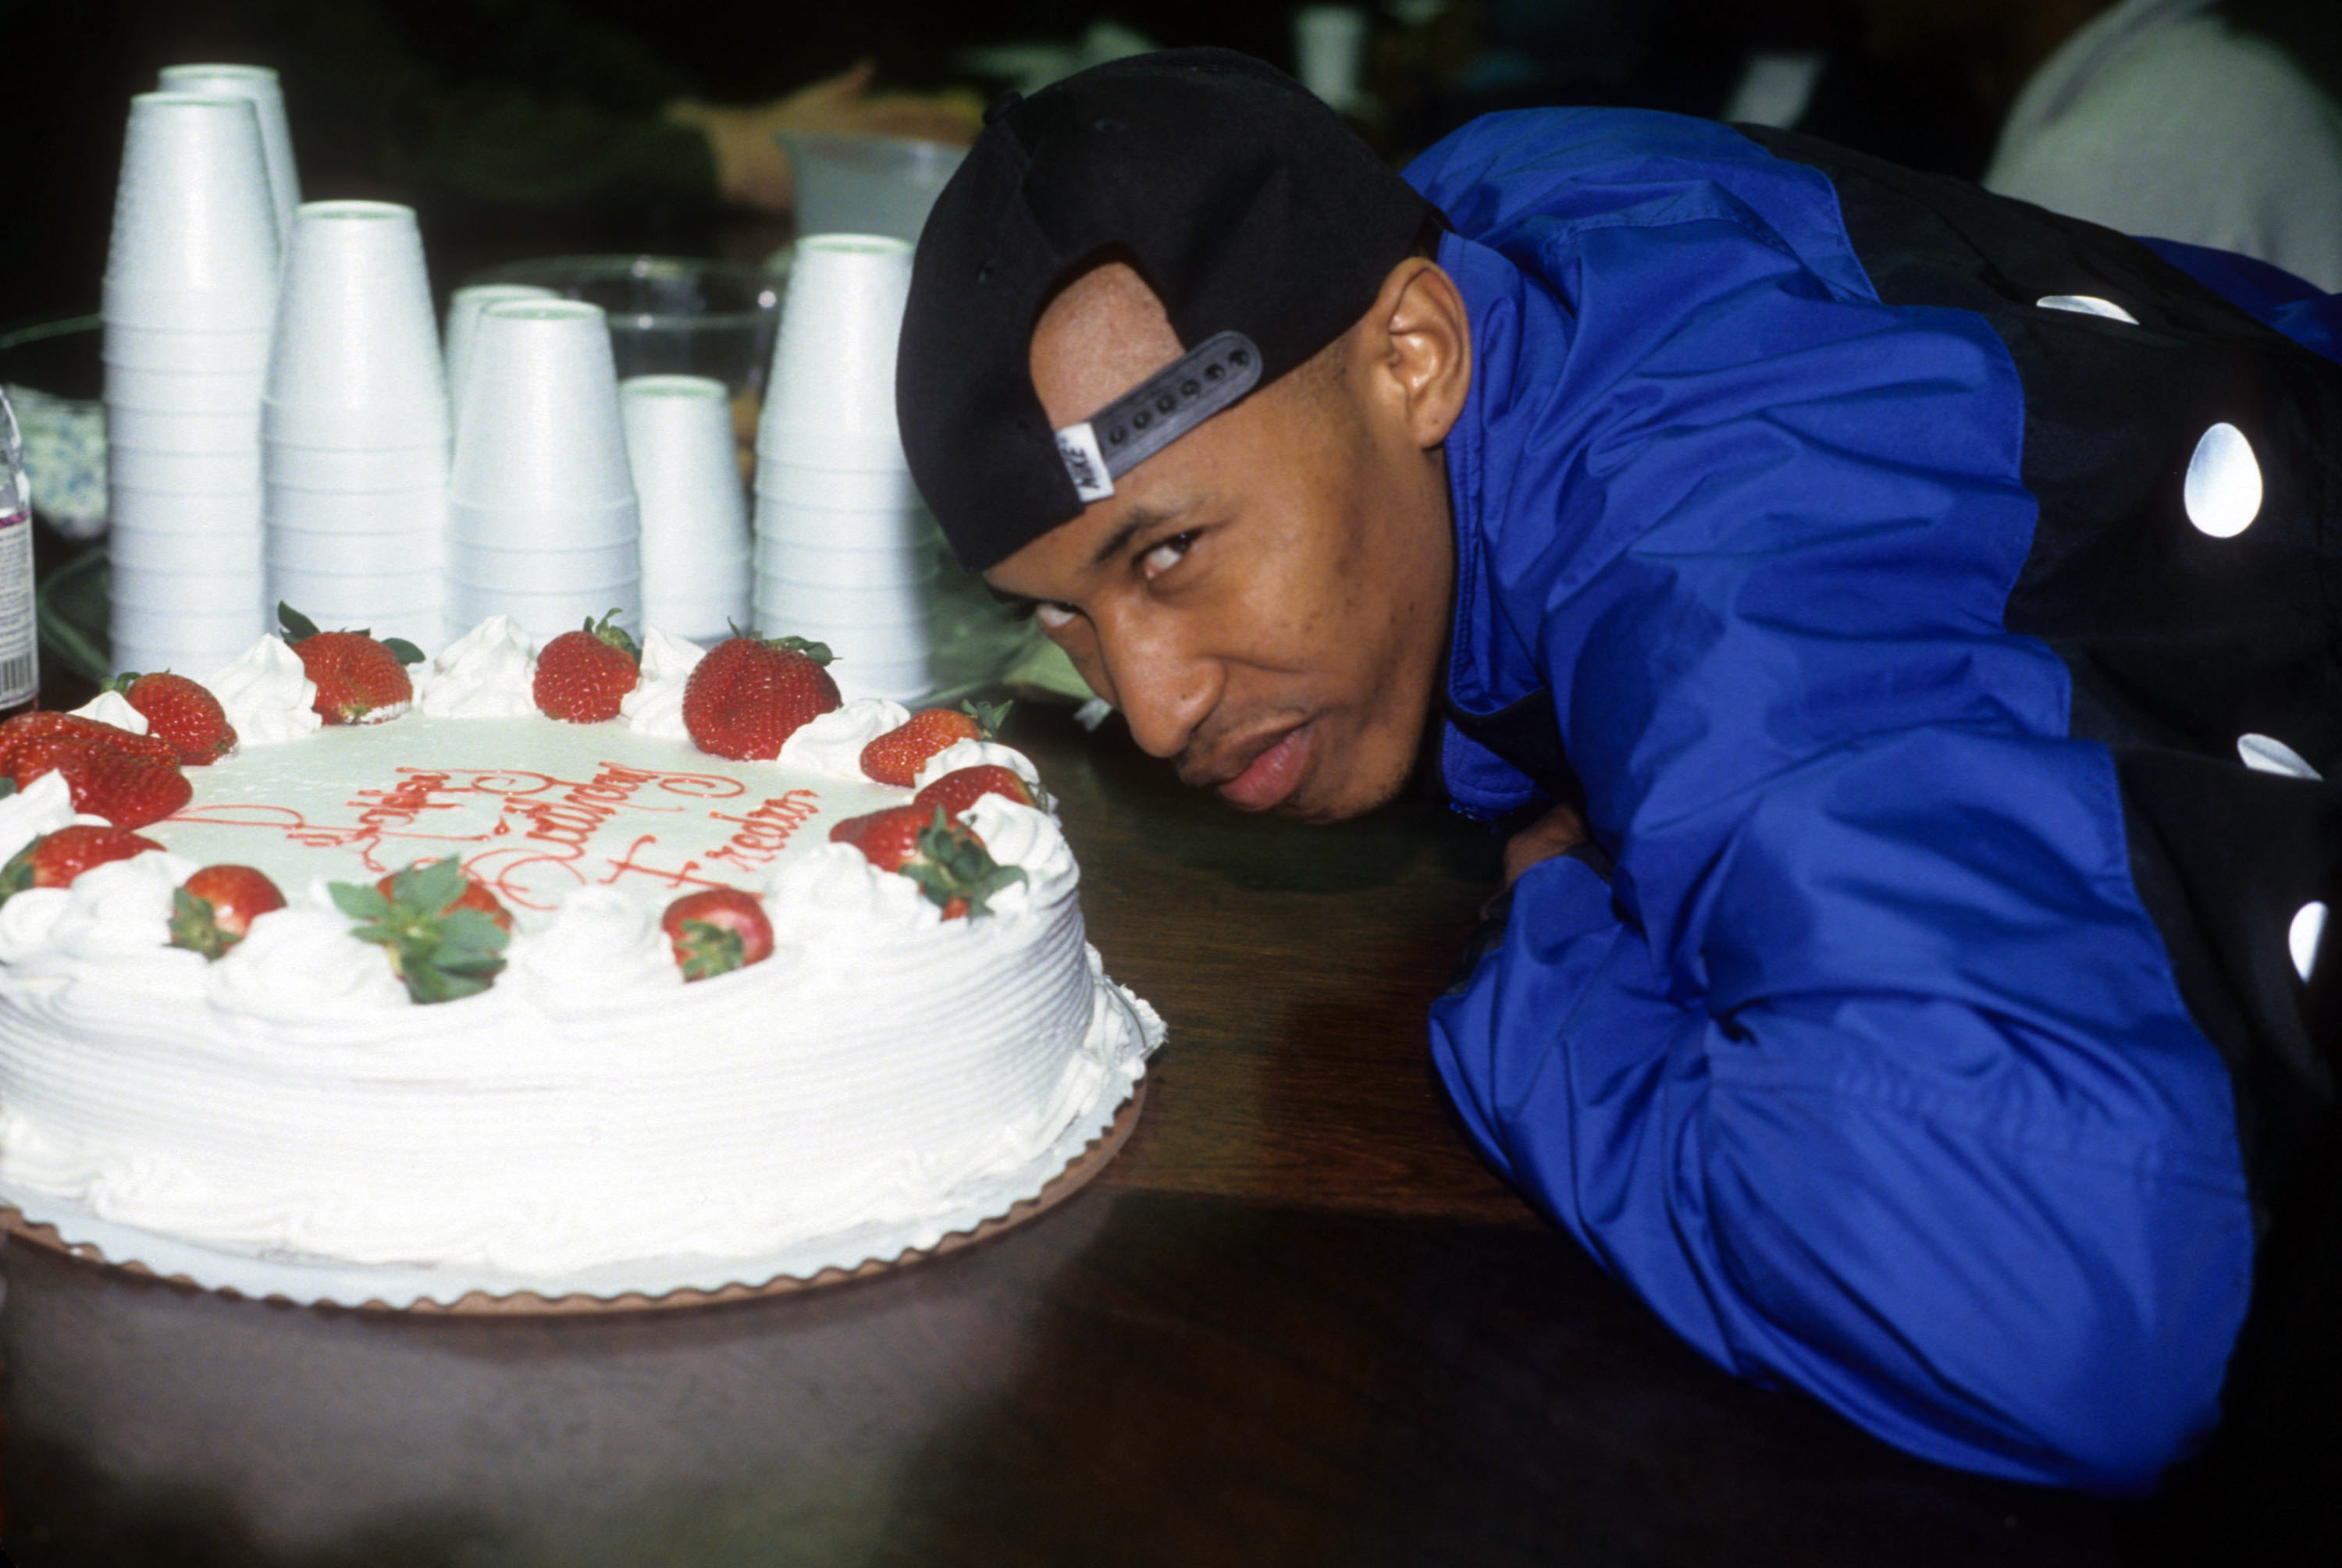 Fredo Starr in a blue jacket in front of a cake with strawberries and writing 